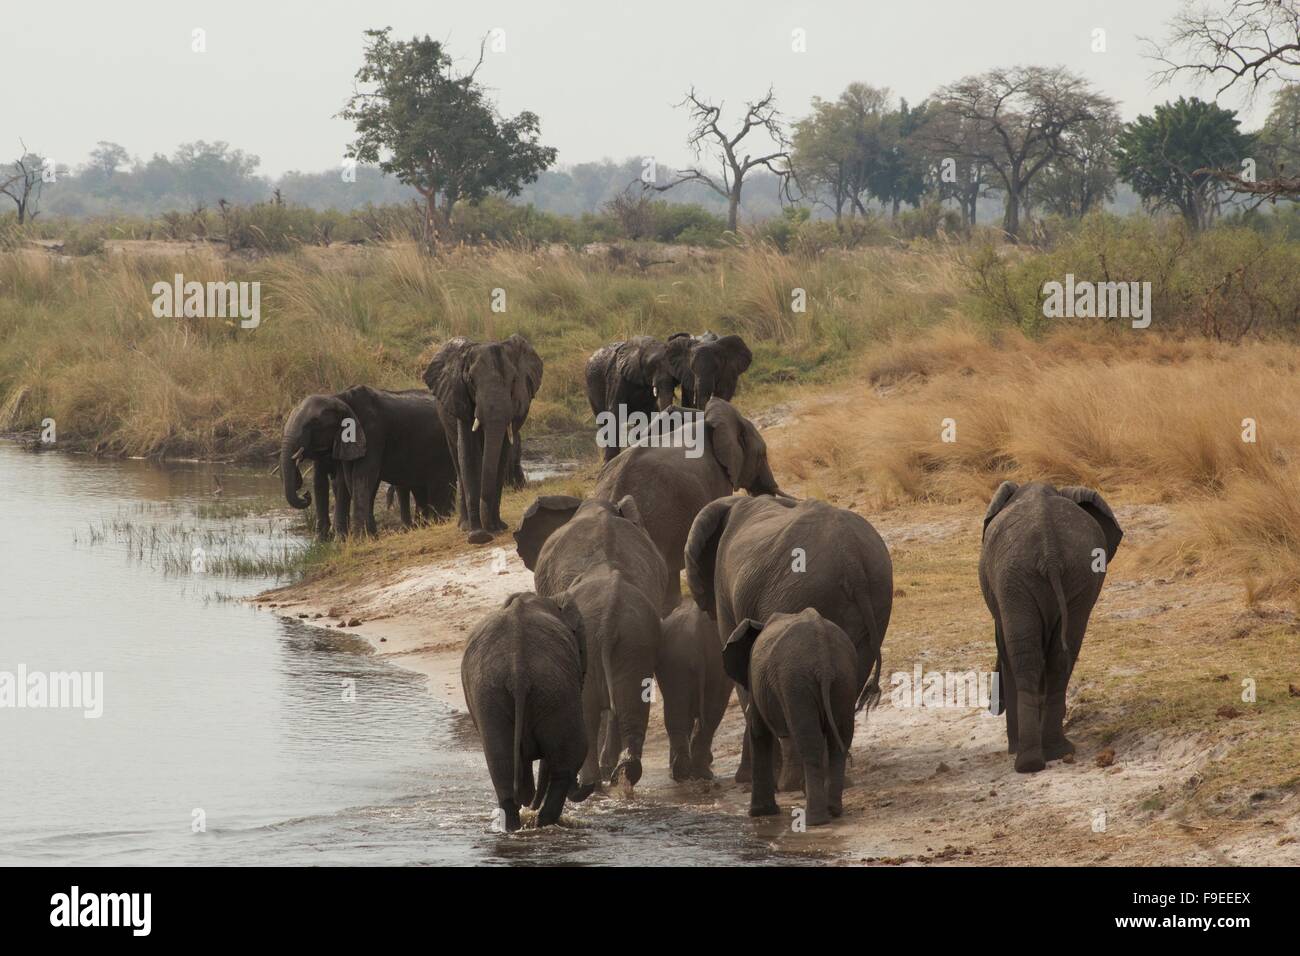 A meeting of Elephant herds Stock Photo